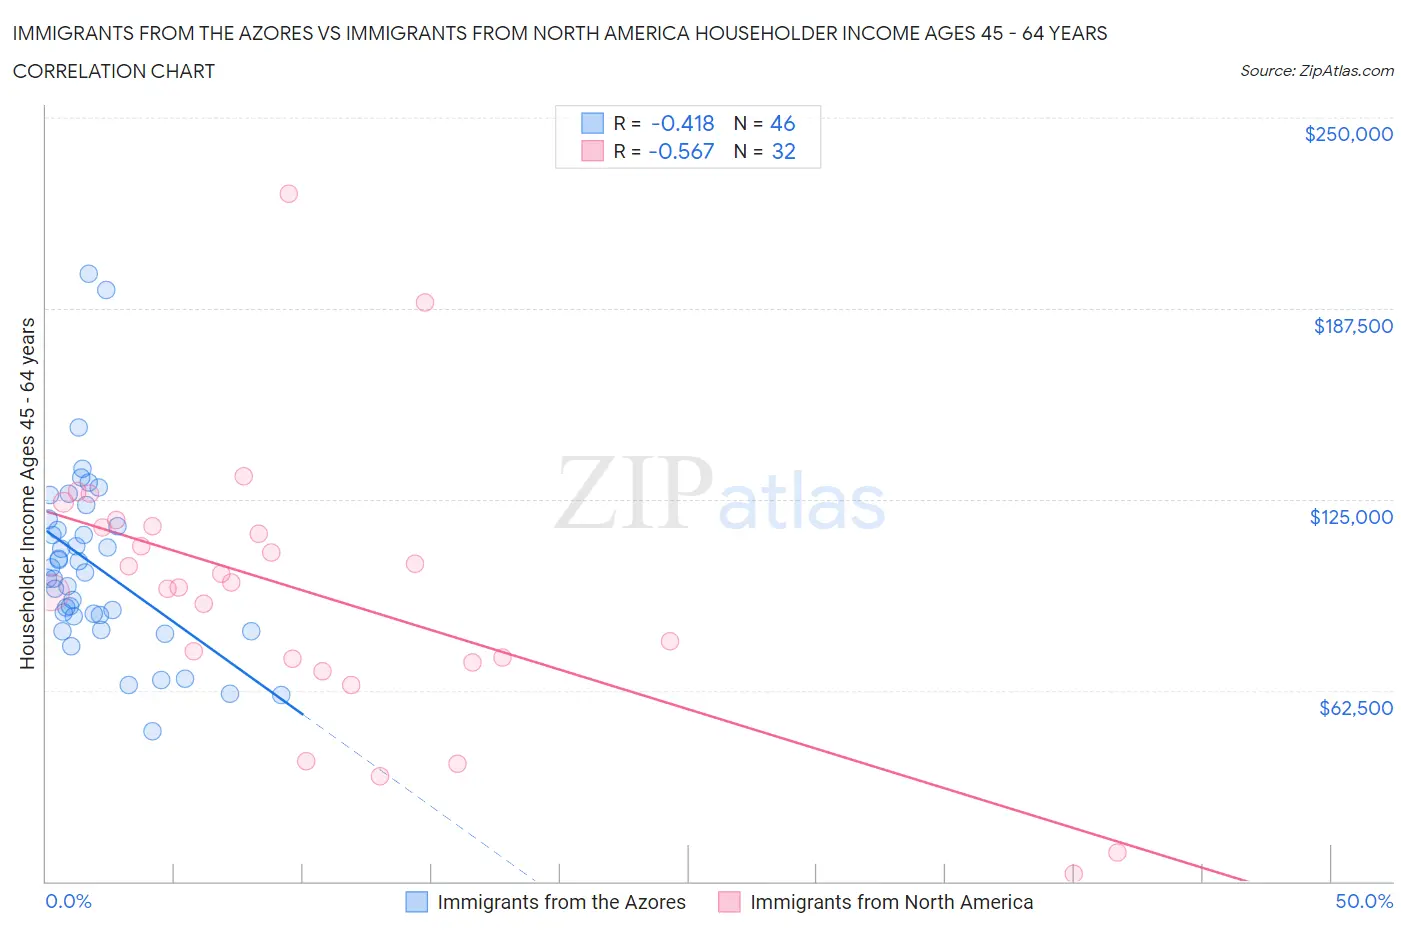 Immigrants from the Azores vs Immigrants from North America Householder Income Ages 45 - 64 years